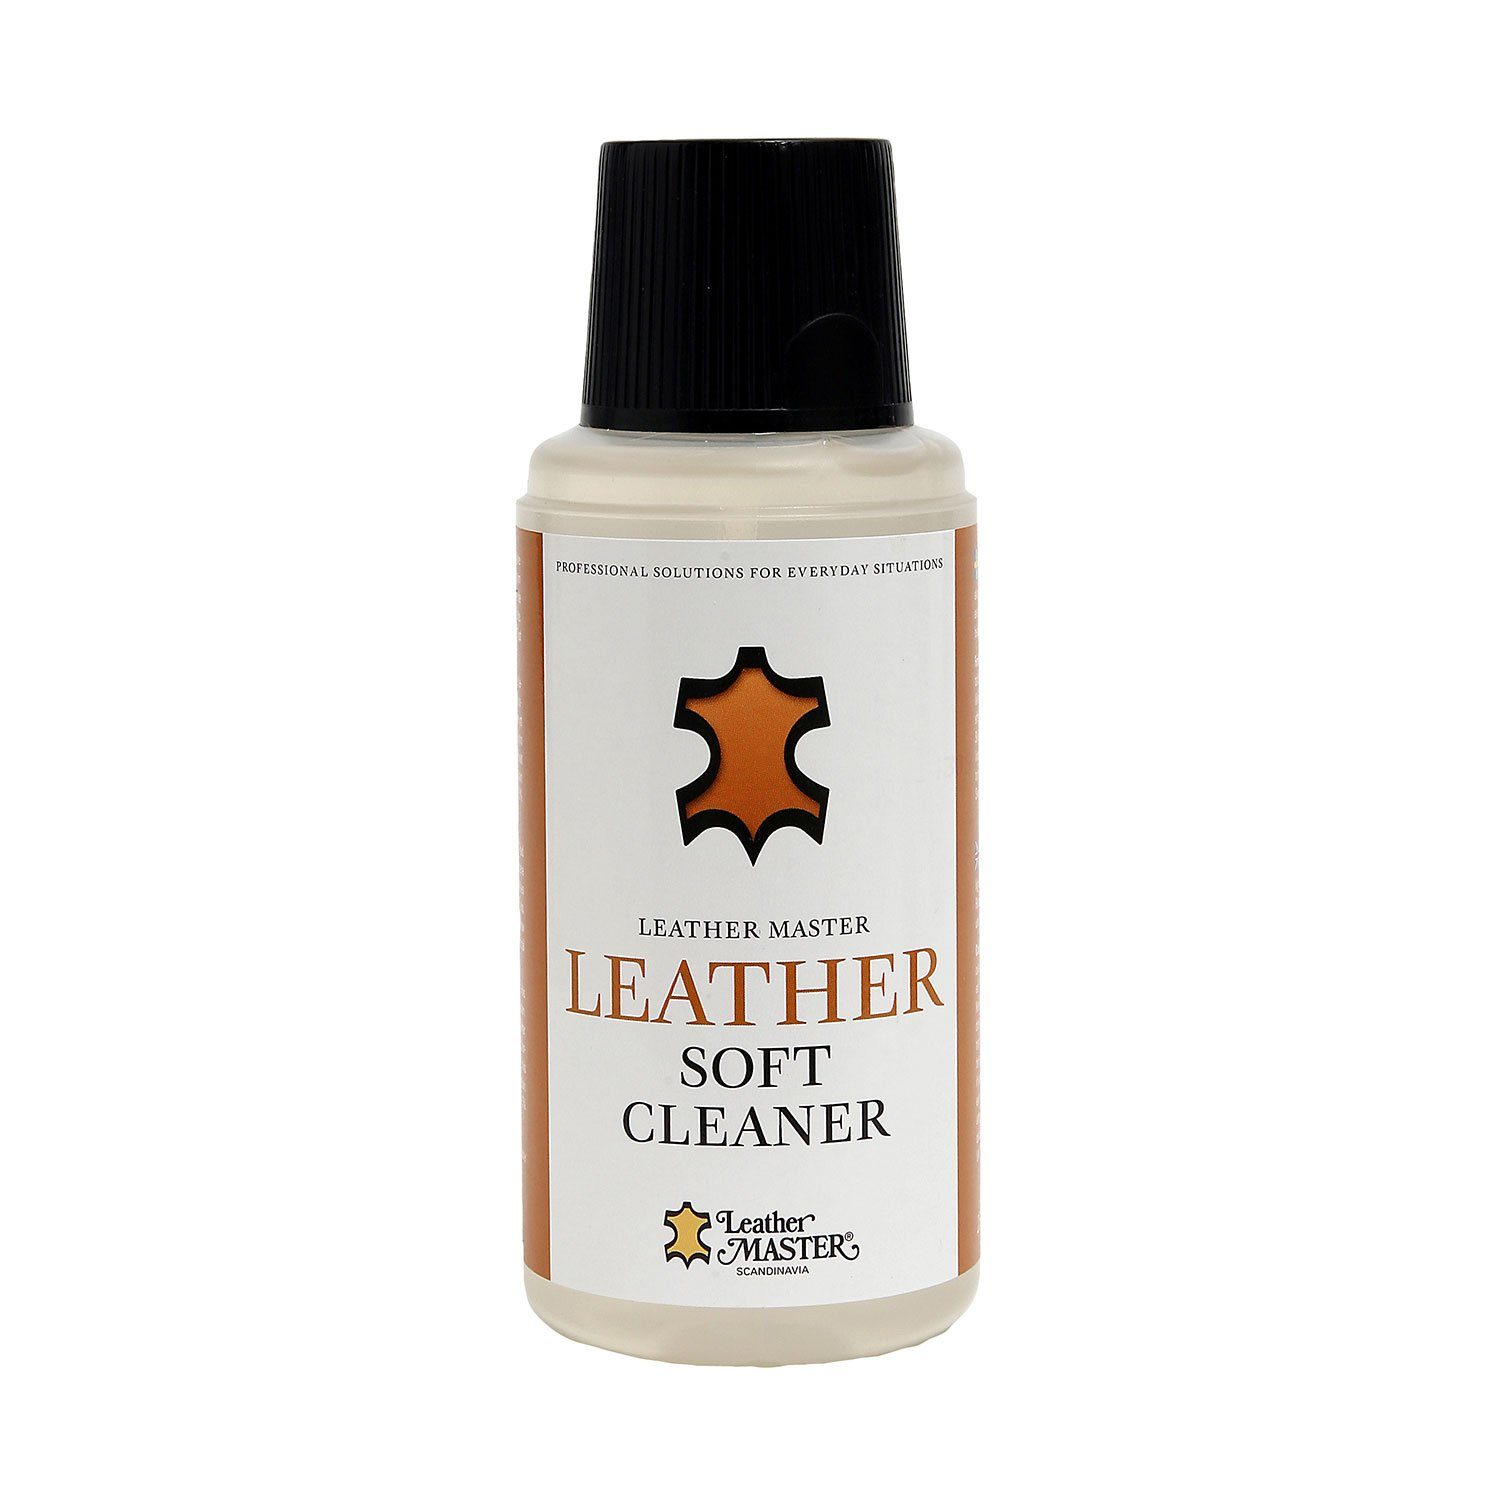 Leather Soft Cleaner från Leather Master.